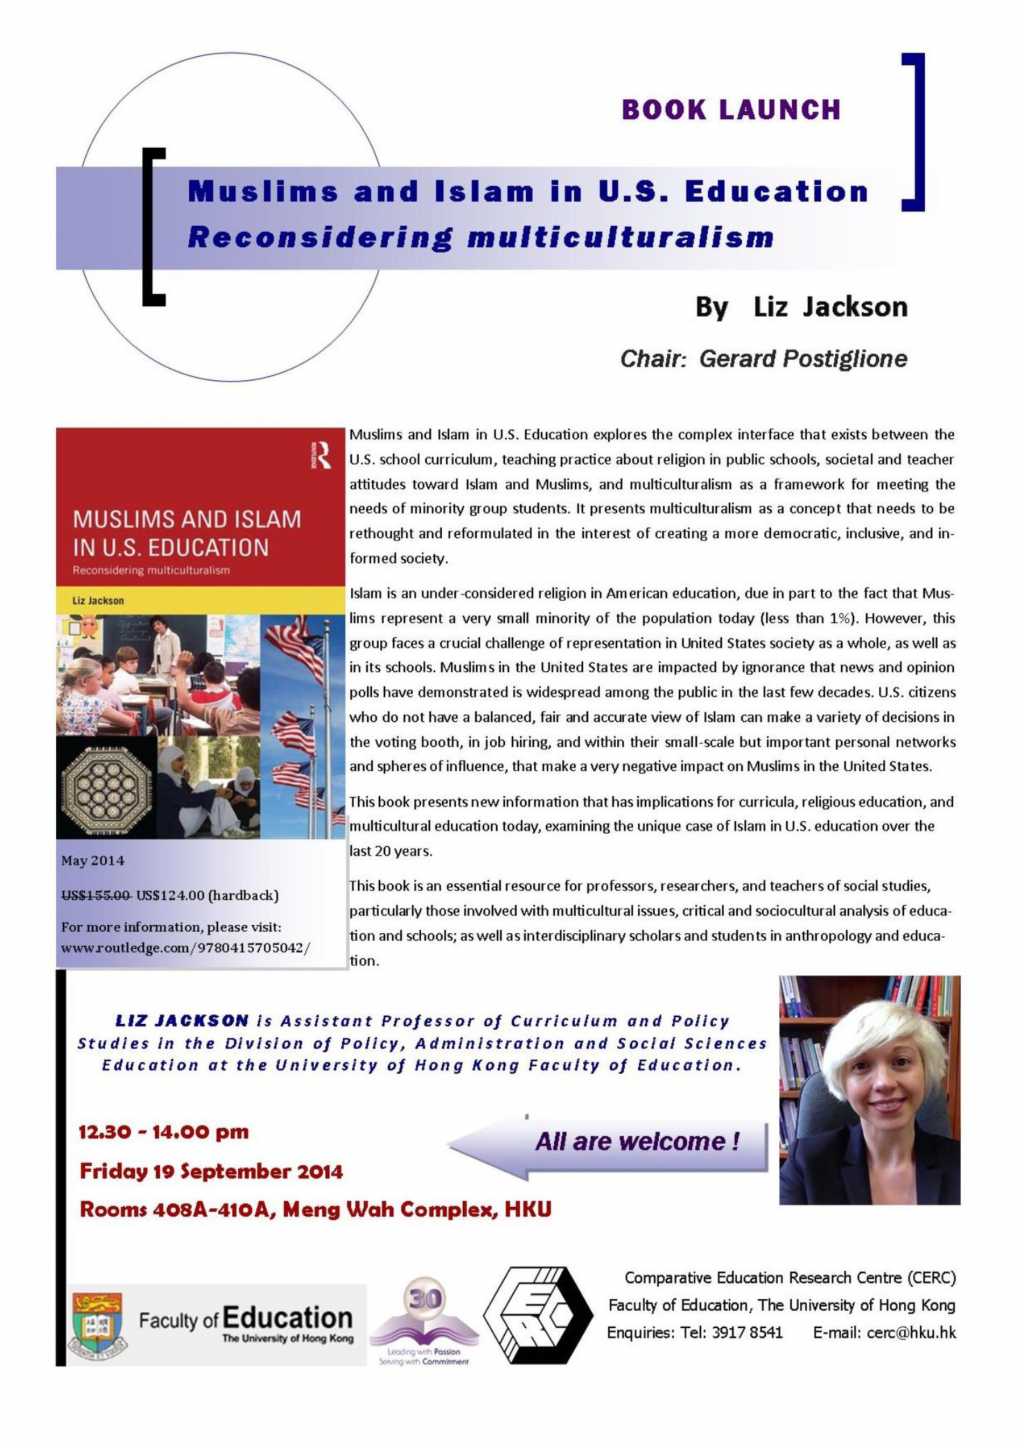 Book Launch - Muslims and Islam in U.S. Education: Reconsidering Multiculturalism